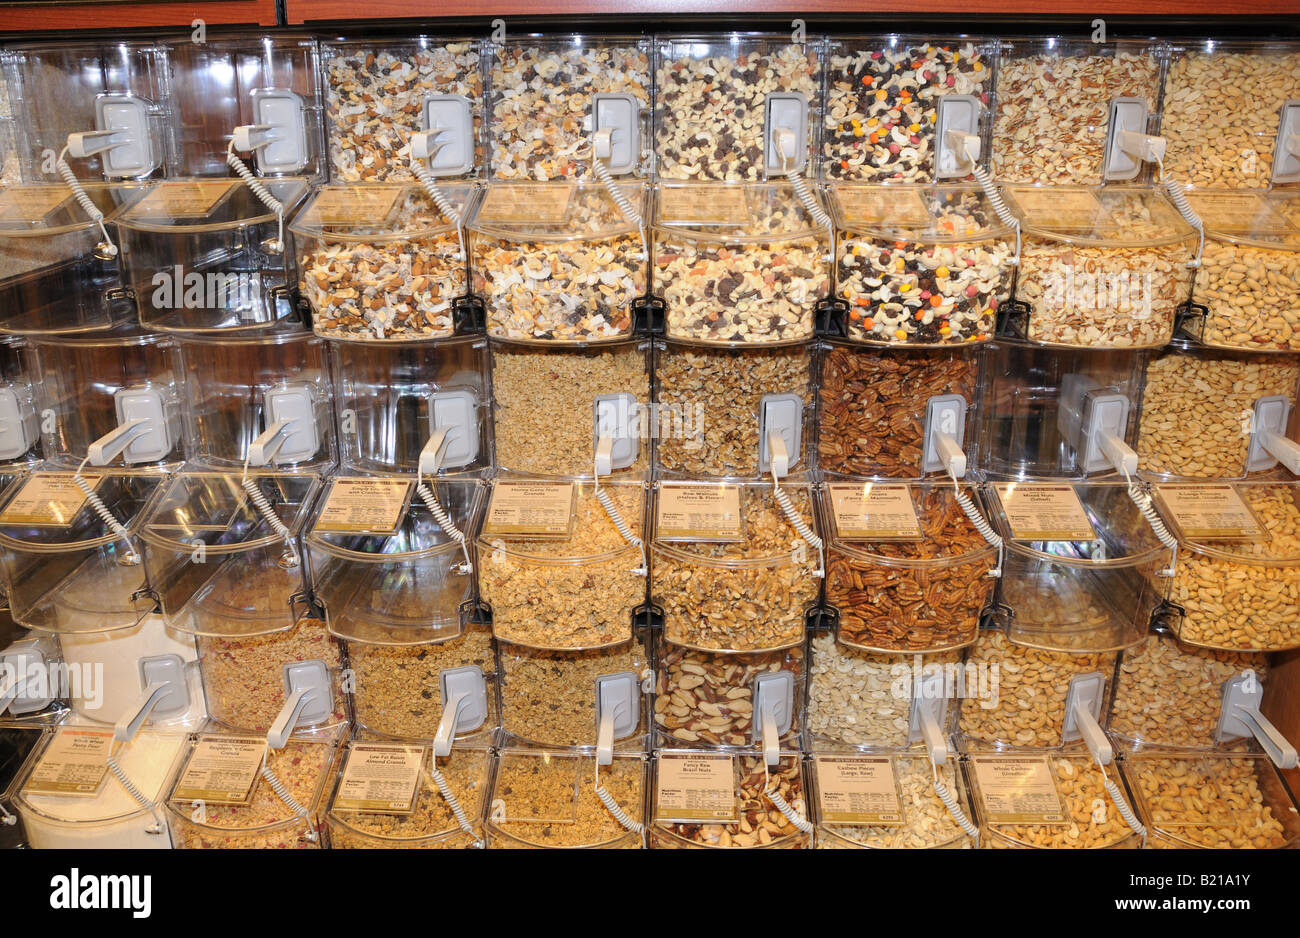 Bulk nuts and cereals for sale in Whole Foods, a Manhattan supermarket Stock Photo